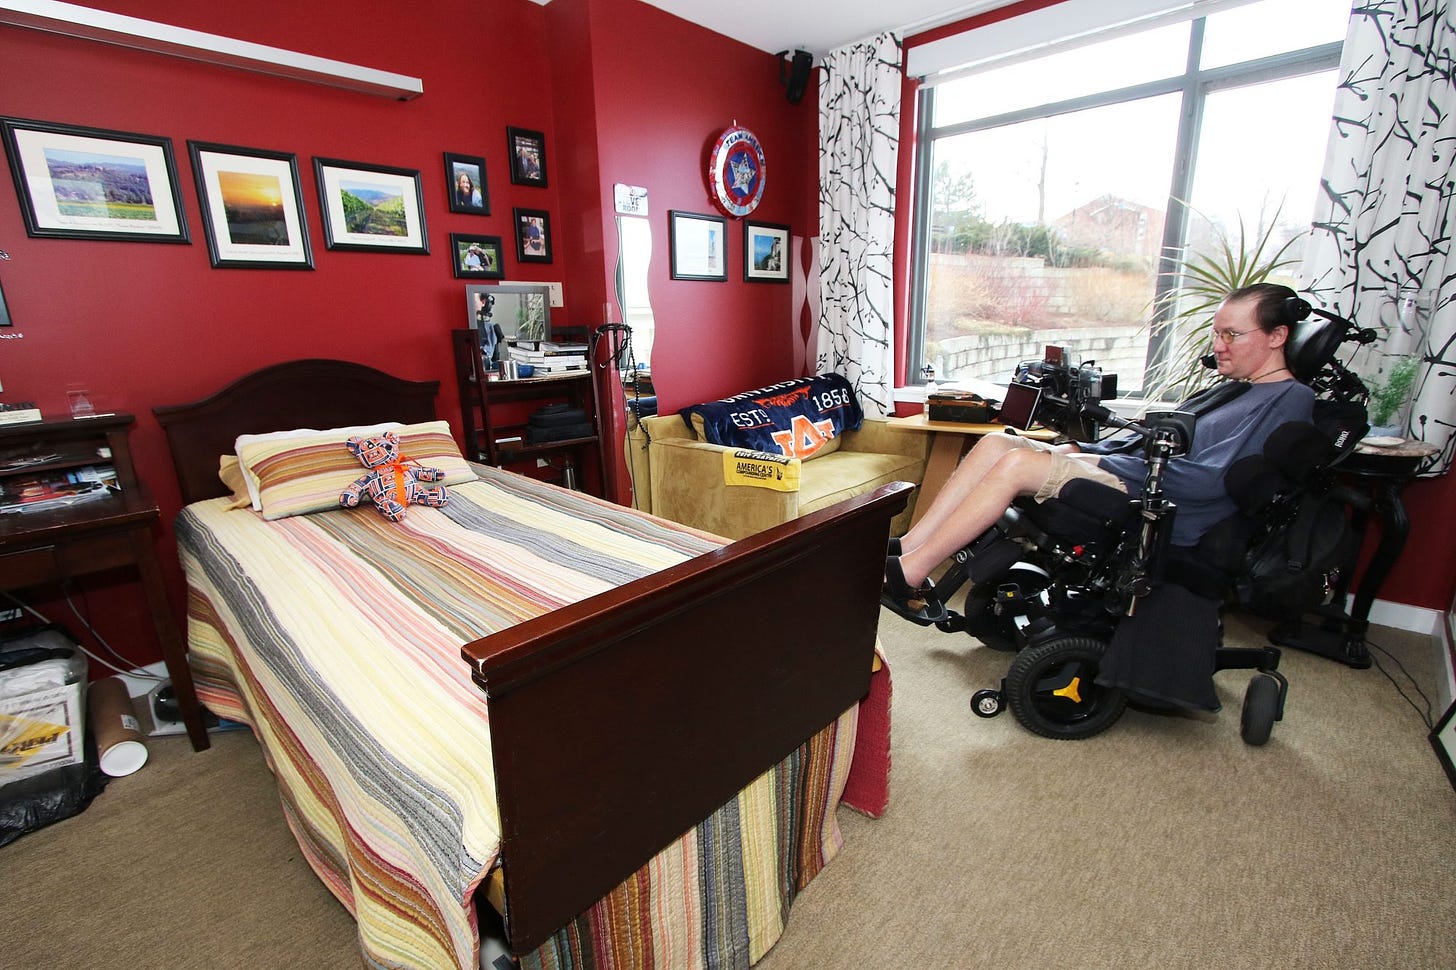 Steve Saling sits in a motorized wheelchair in his residence hall room, which has bright red walls, his chosen artwork and personal linens and curtains.